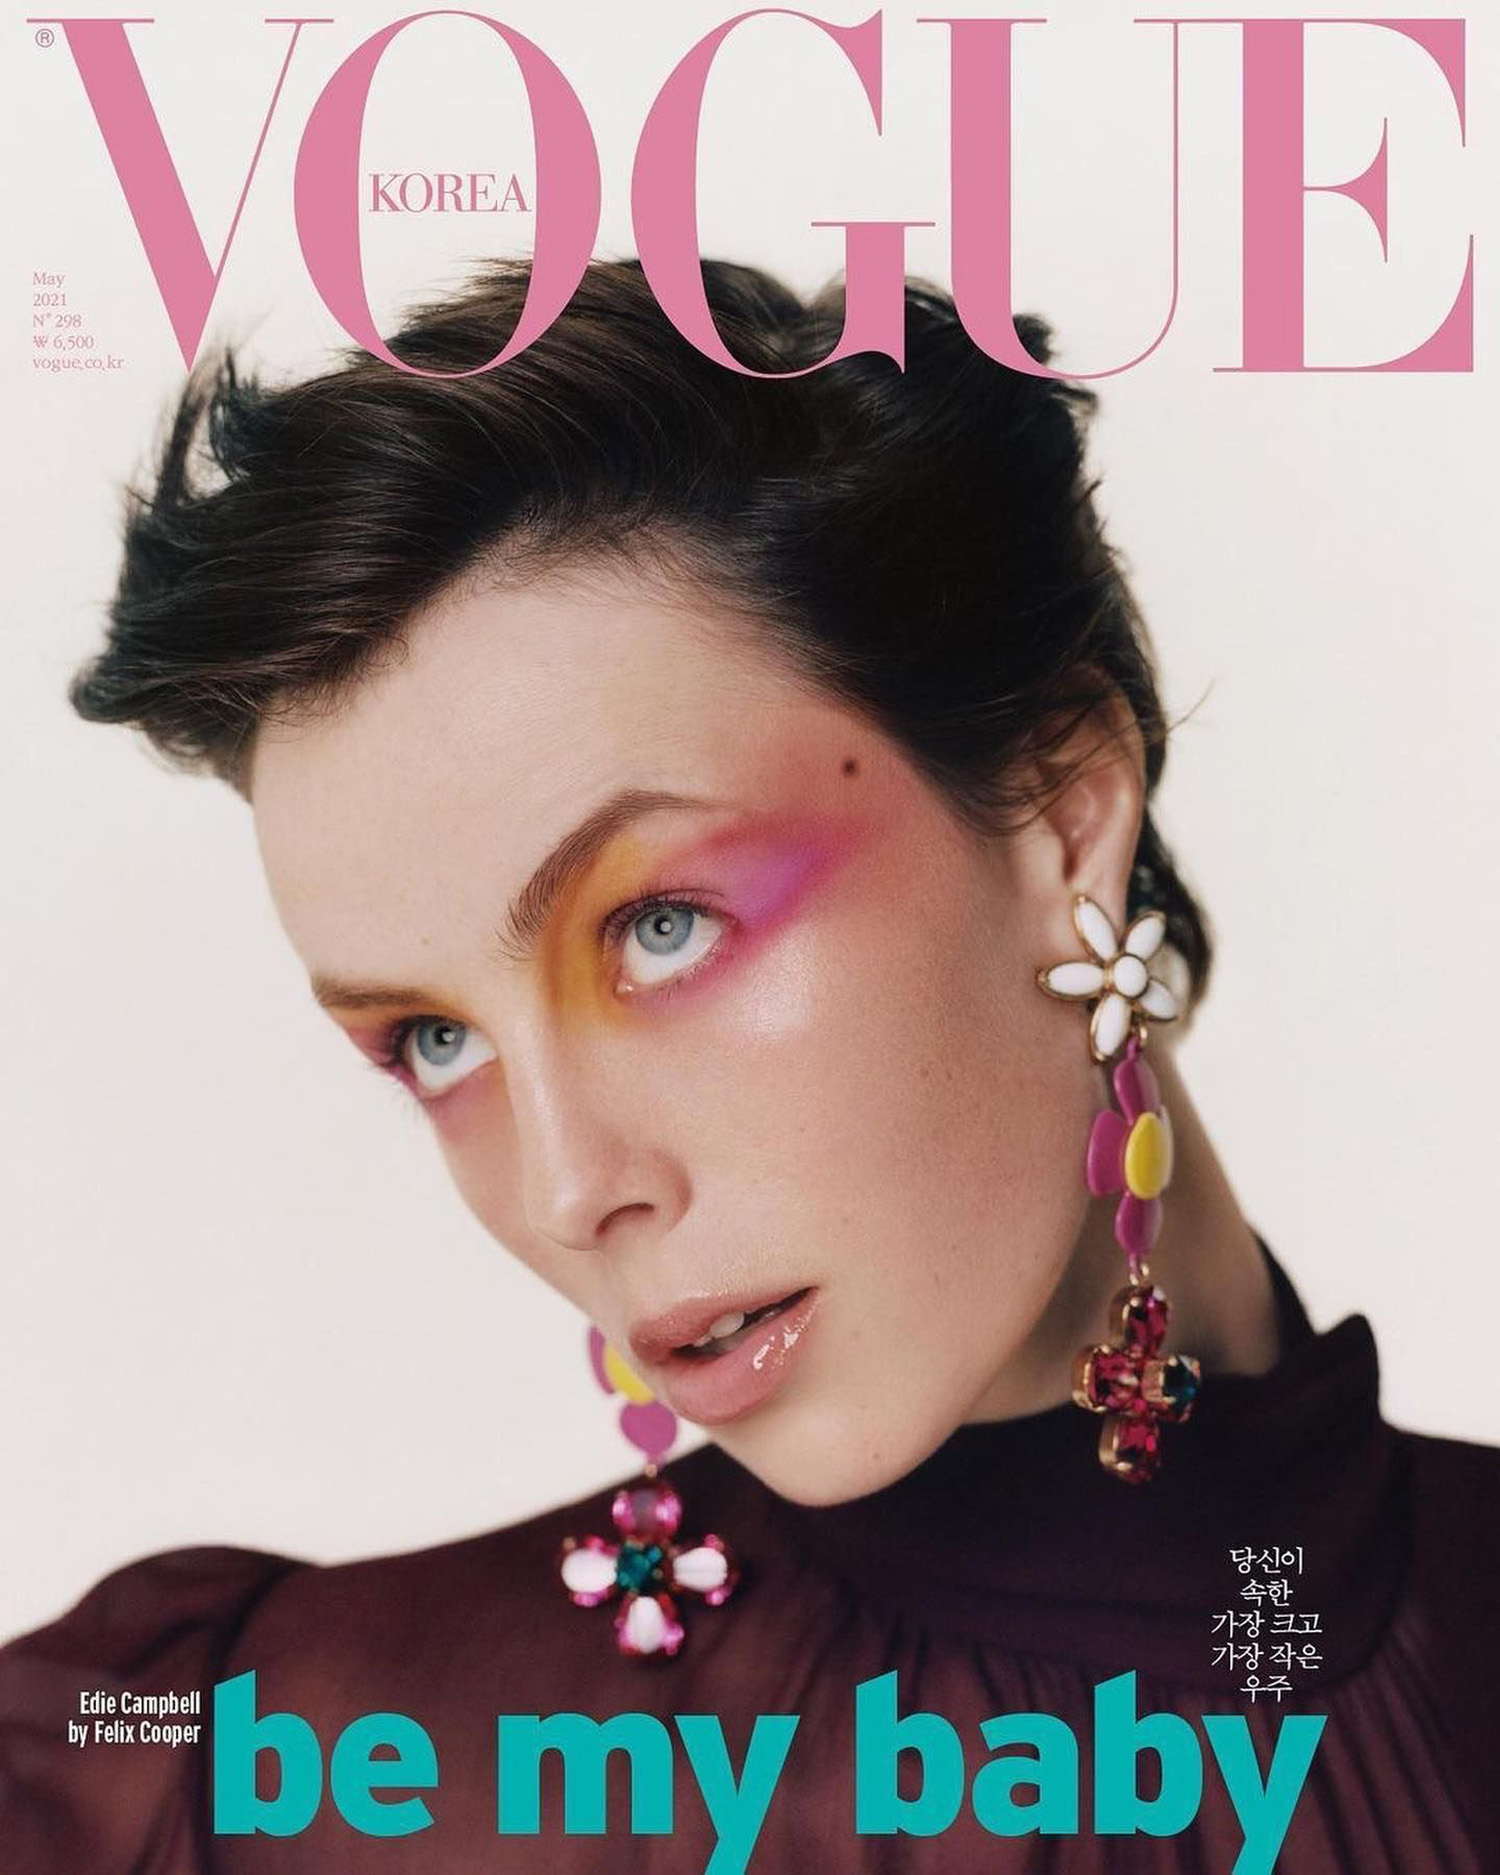 Edie Campbell in Saint Laurent on Vogue Korea May 2021 cover by Felix Cooper